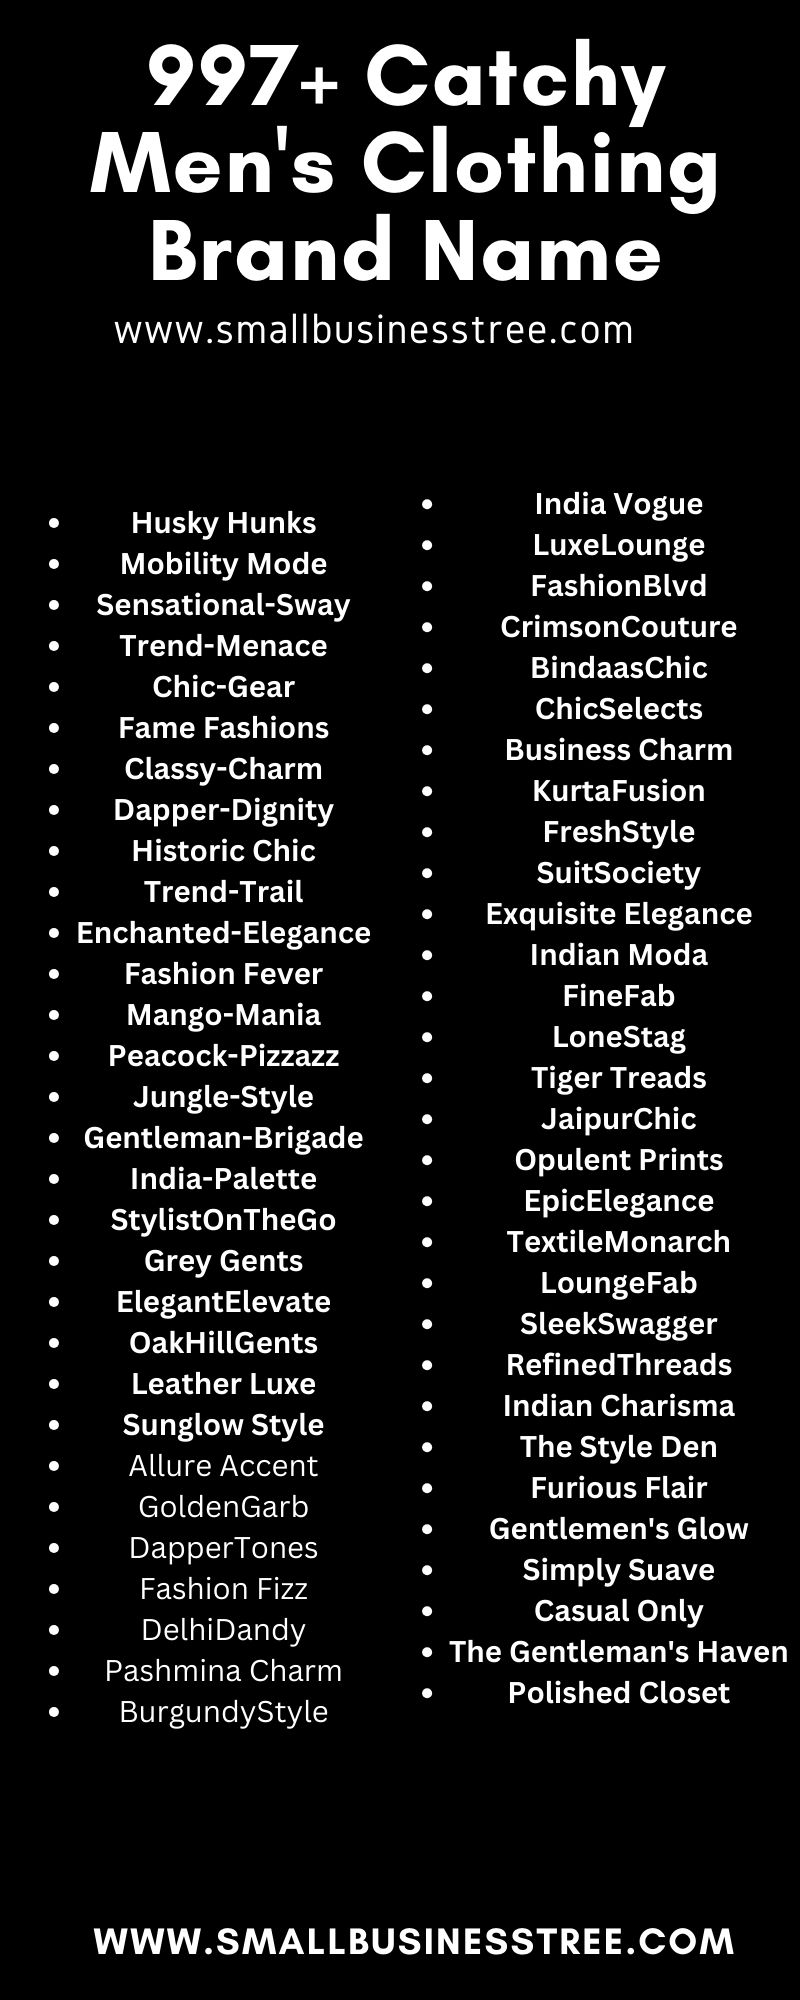 701+ Garment Shop Name Ideas in India (2023) Men’s Clothing Brand Names